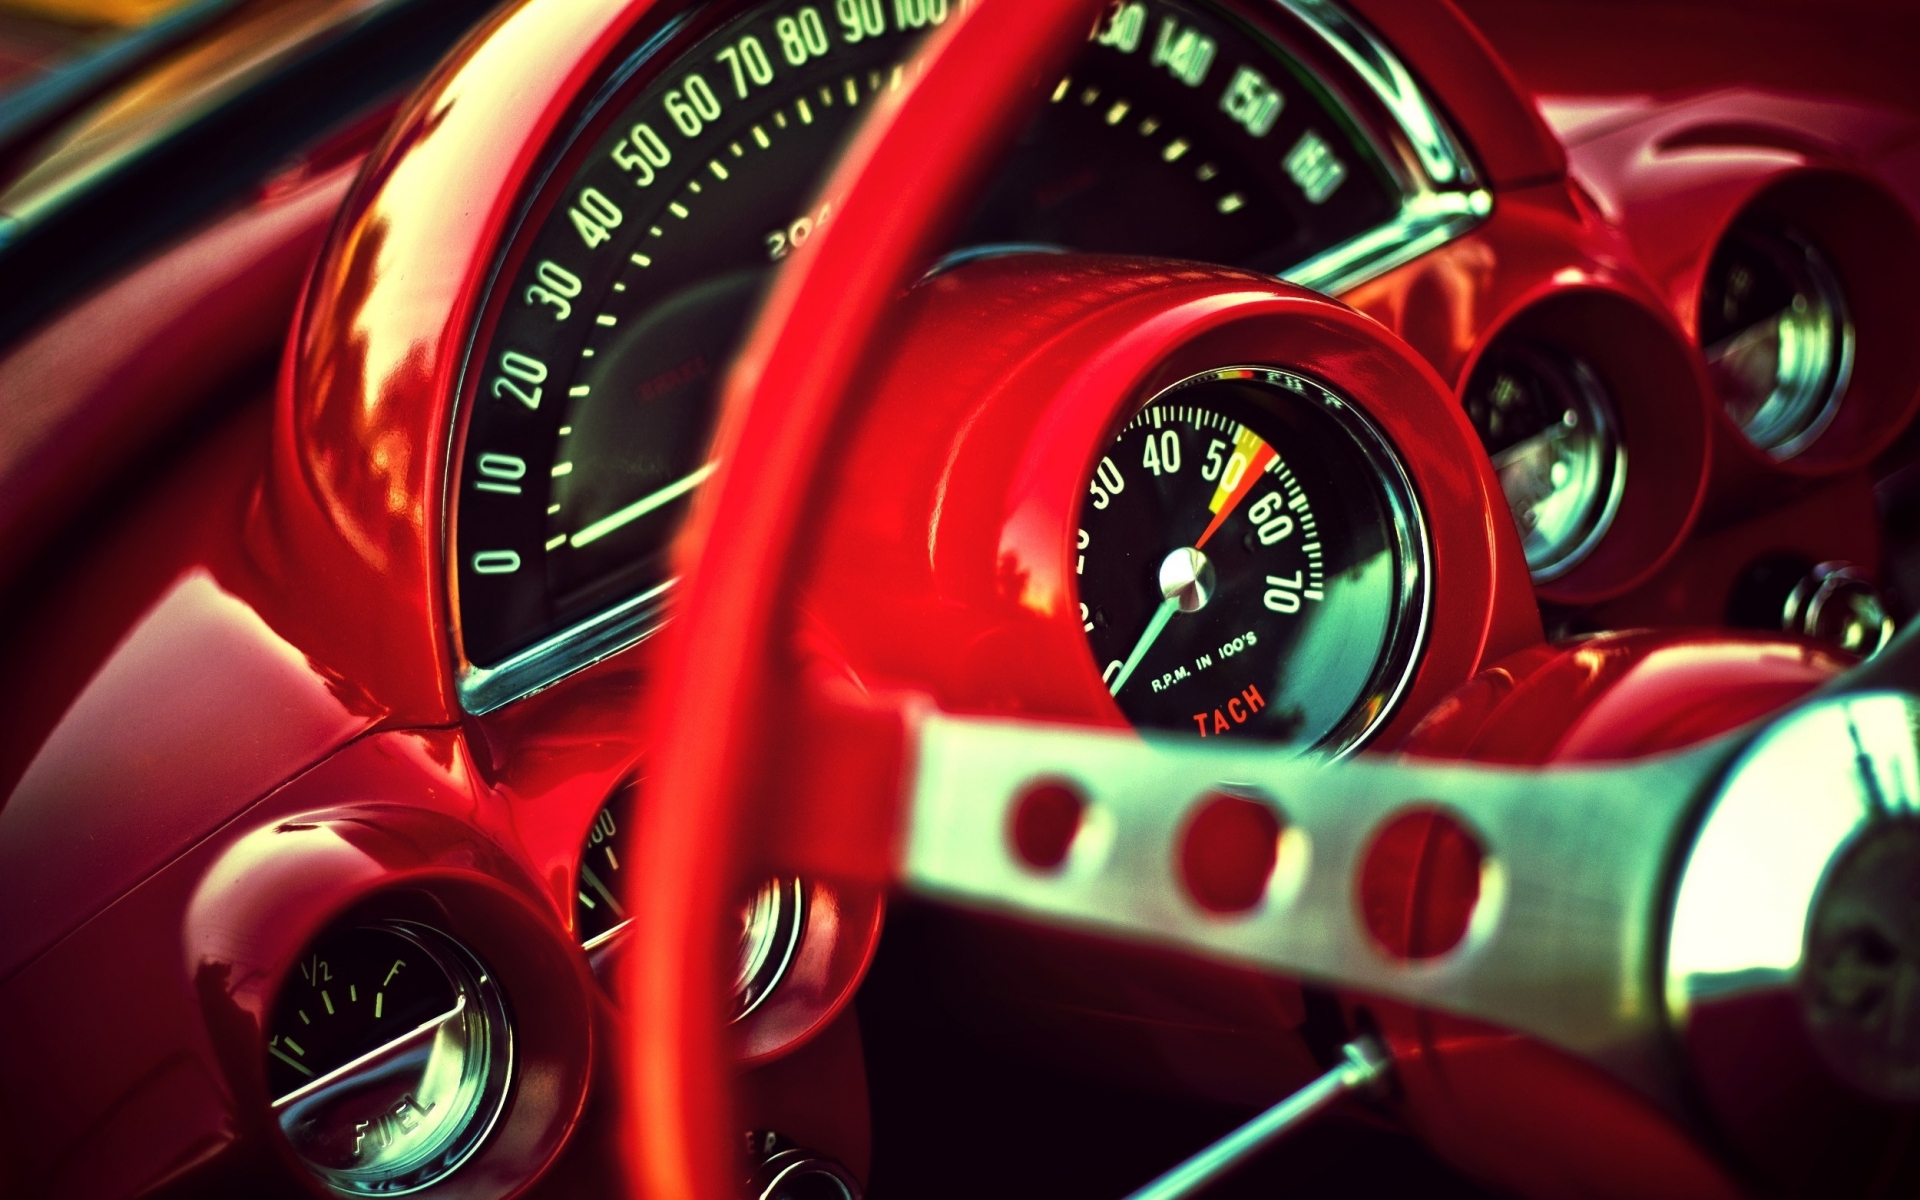 vehicles, Cars, Chevy, Chevrolet, Corvette, Old, Retro, Classic, Red, Colors, Contrast, Numbers, Wheels, Gauge, Glass, Interior, Close, Up, Macro, Muscle Wallpaper